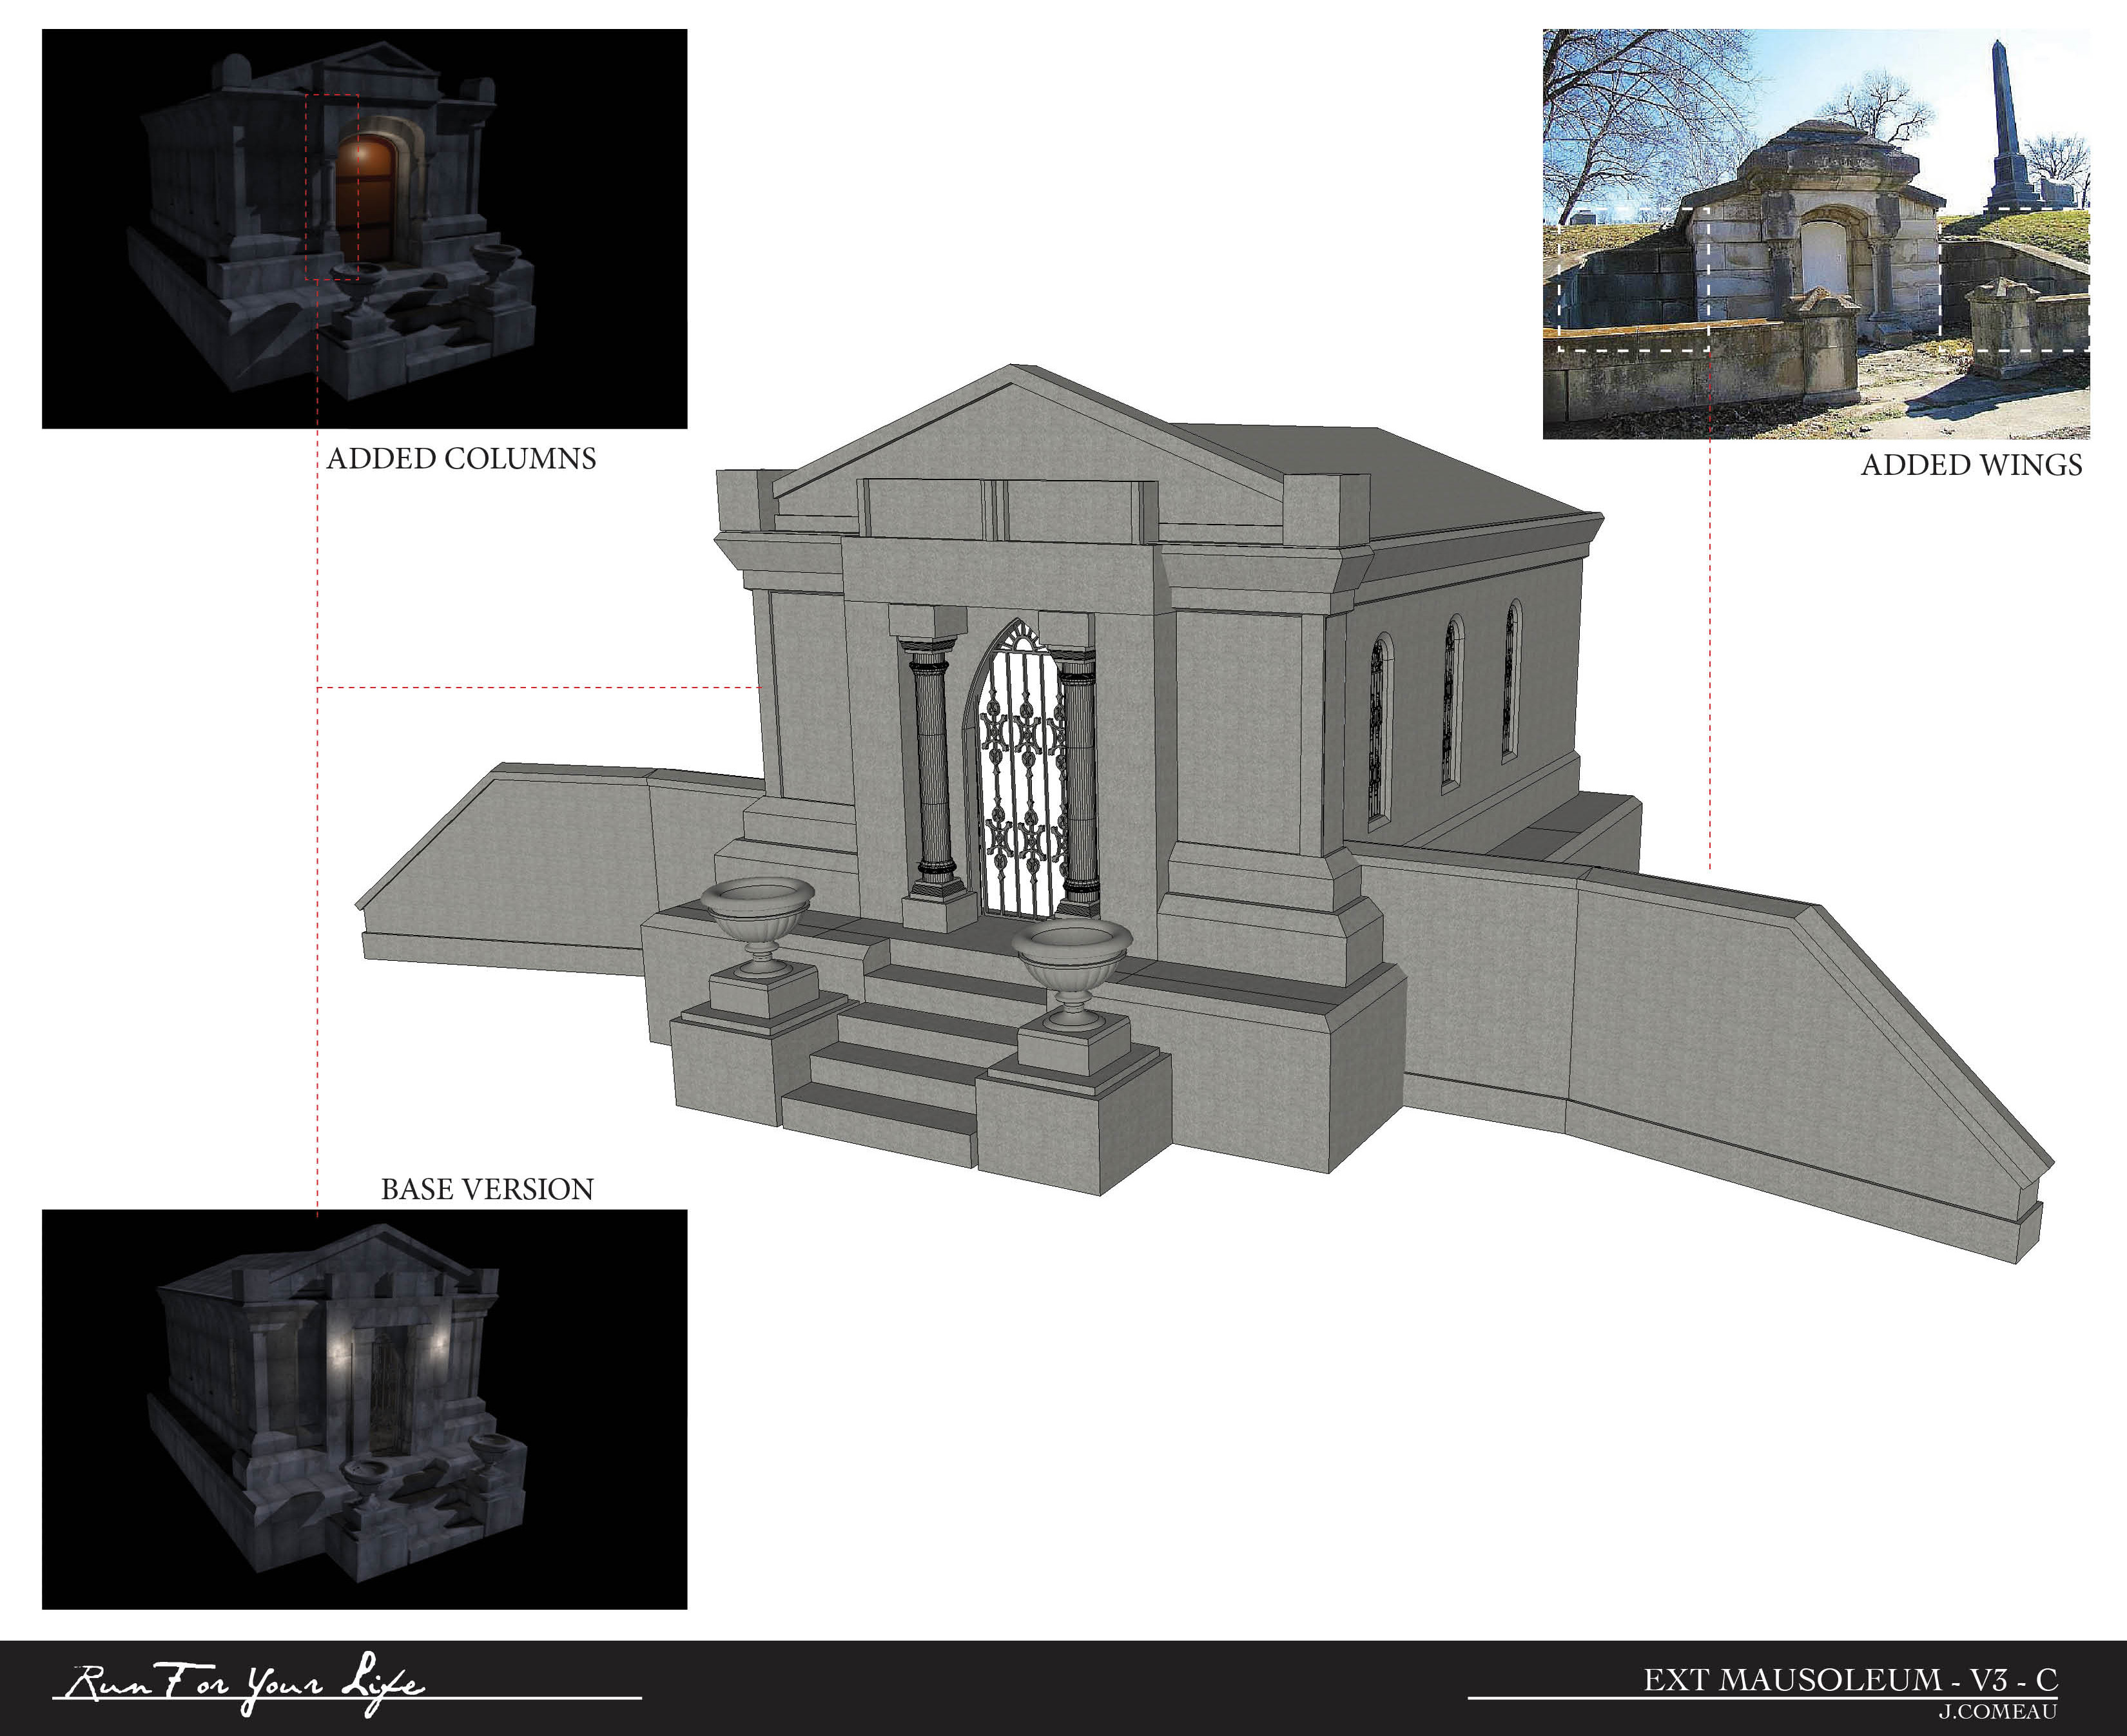 Sketchup model &amp; modo renders. We lost the wings in the final version due to a change in location.